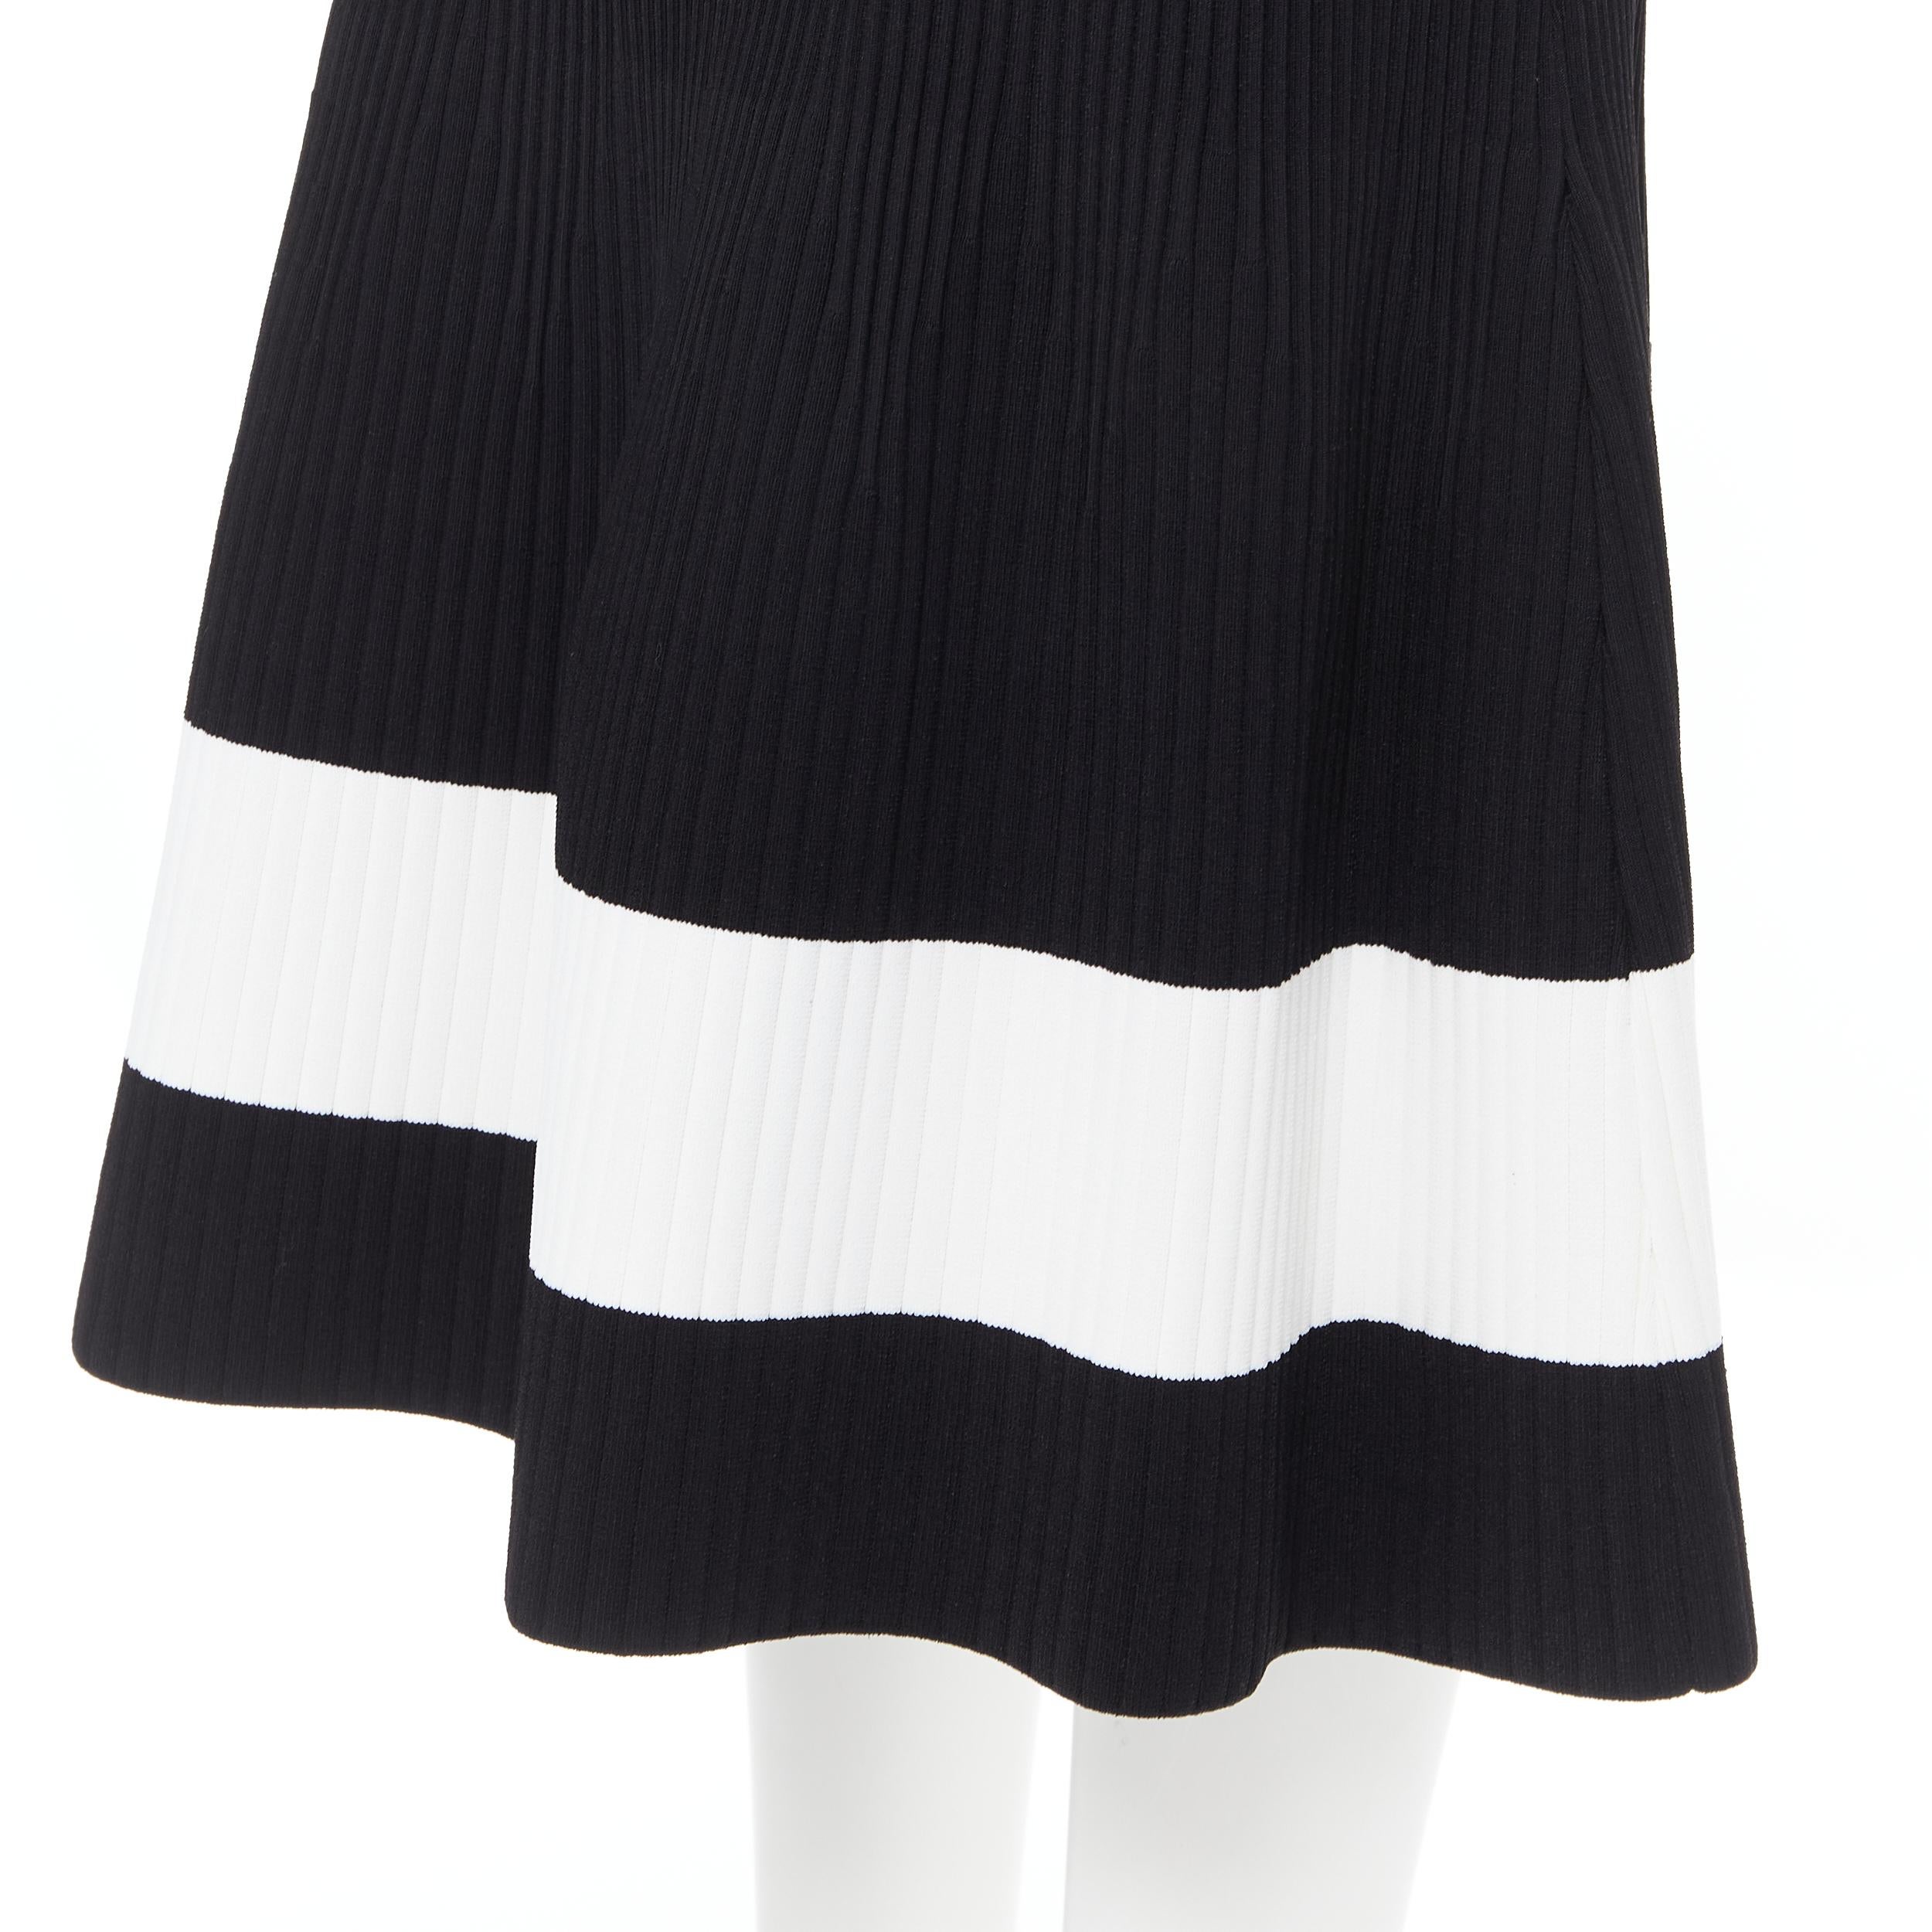 VICTORIA BECKHAM black white colorblocked ribbed fit flare midi skirt XS 
Reference: LNKO/A01759 
Brand: Victoria Beckham 
Designer: Victoria Beckham 
Material: Viscose 
Color: Black 
Pattern: Solid 
Closure: Zip 
Extra Detail: Ribbed knit.